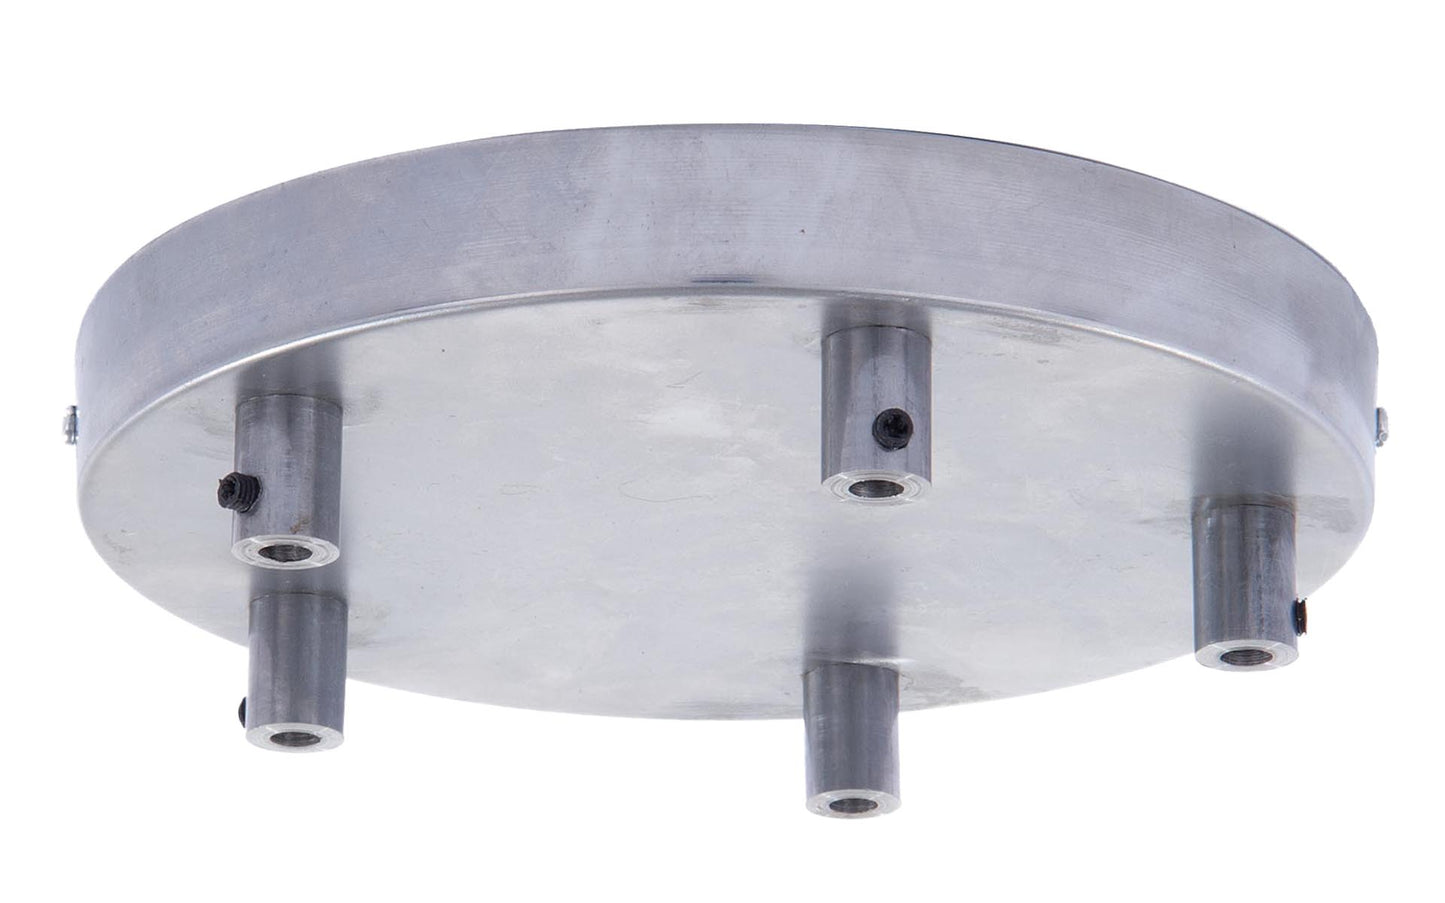 5-Port Lighting Fixture Canopy Kit in Unfinished Steel